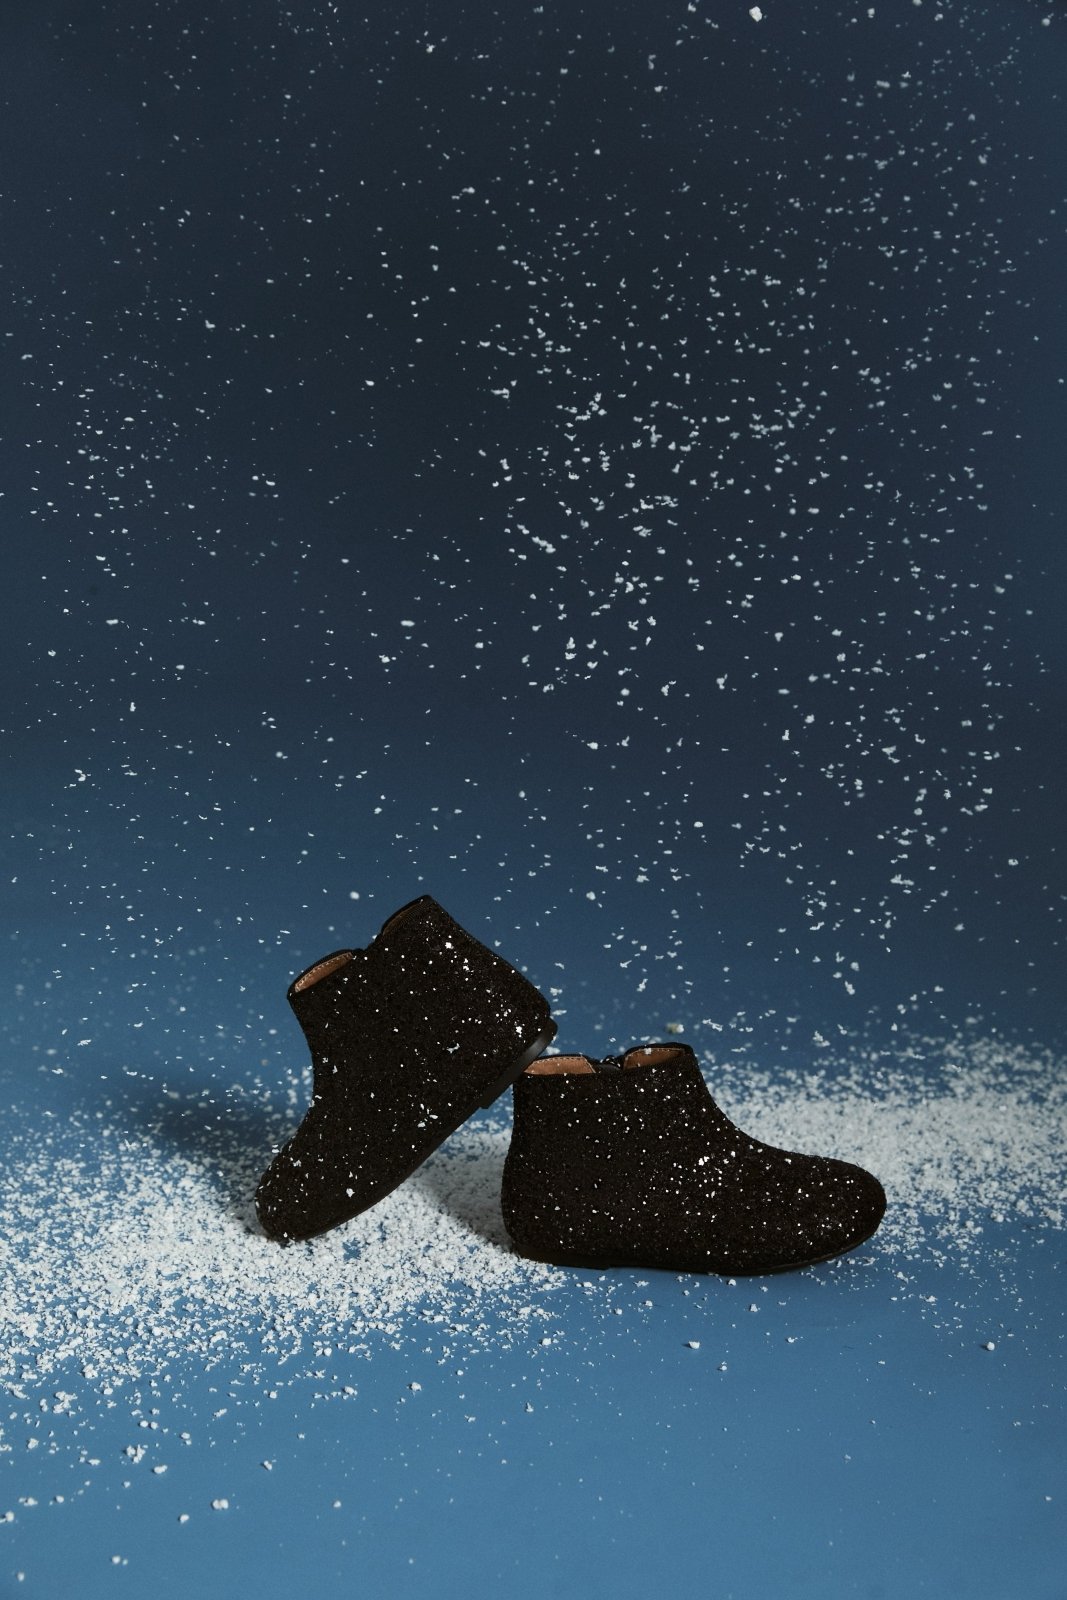 Chiara Glitter Black Boots by Age of Innocence